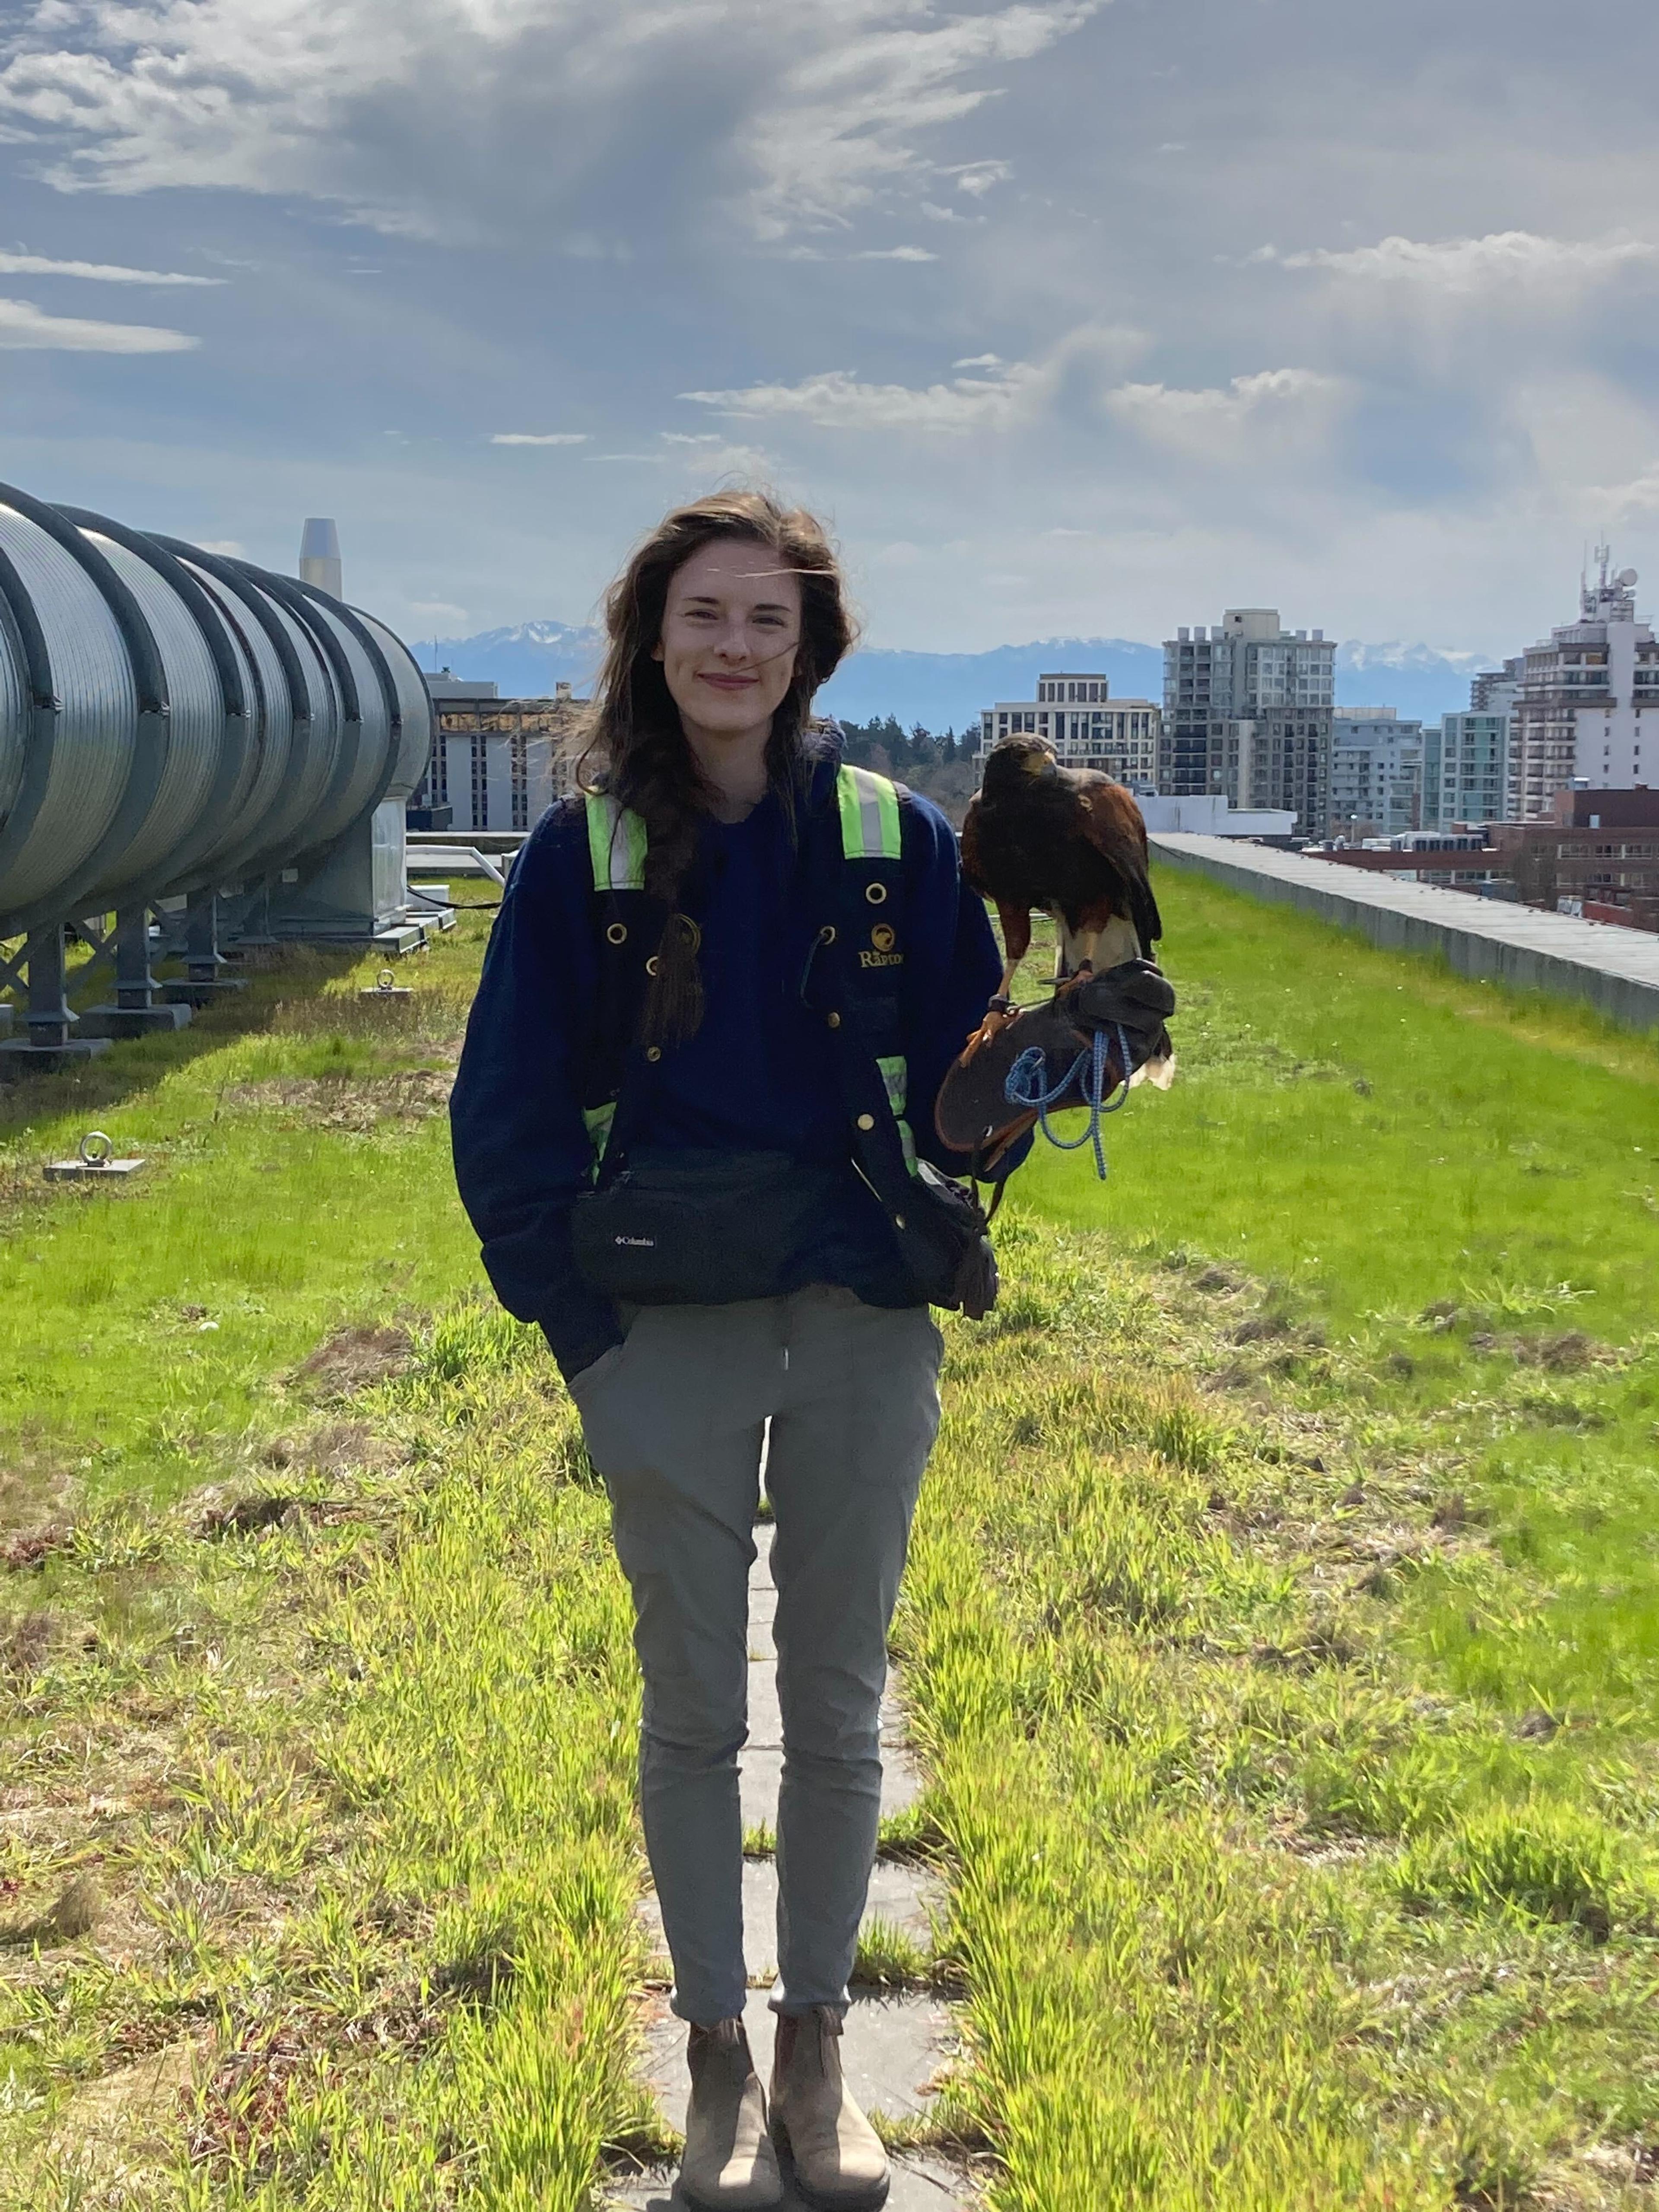 Woman stands with a hawk on her glove, on a rooftop